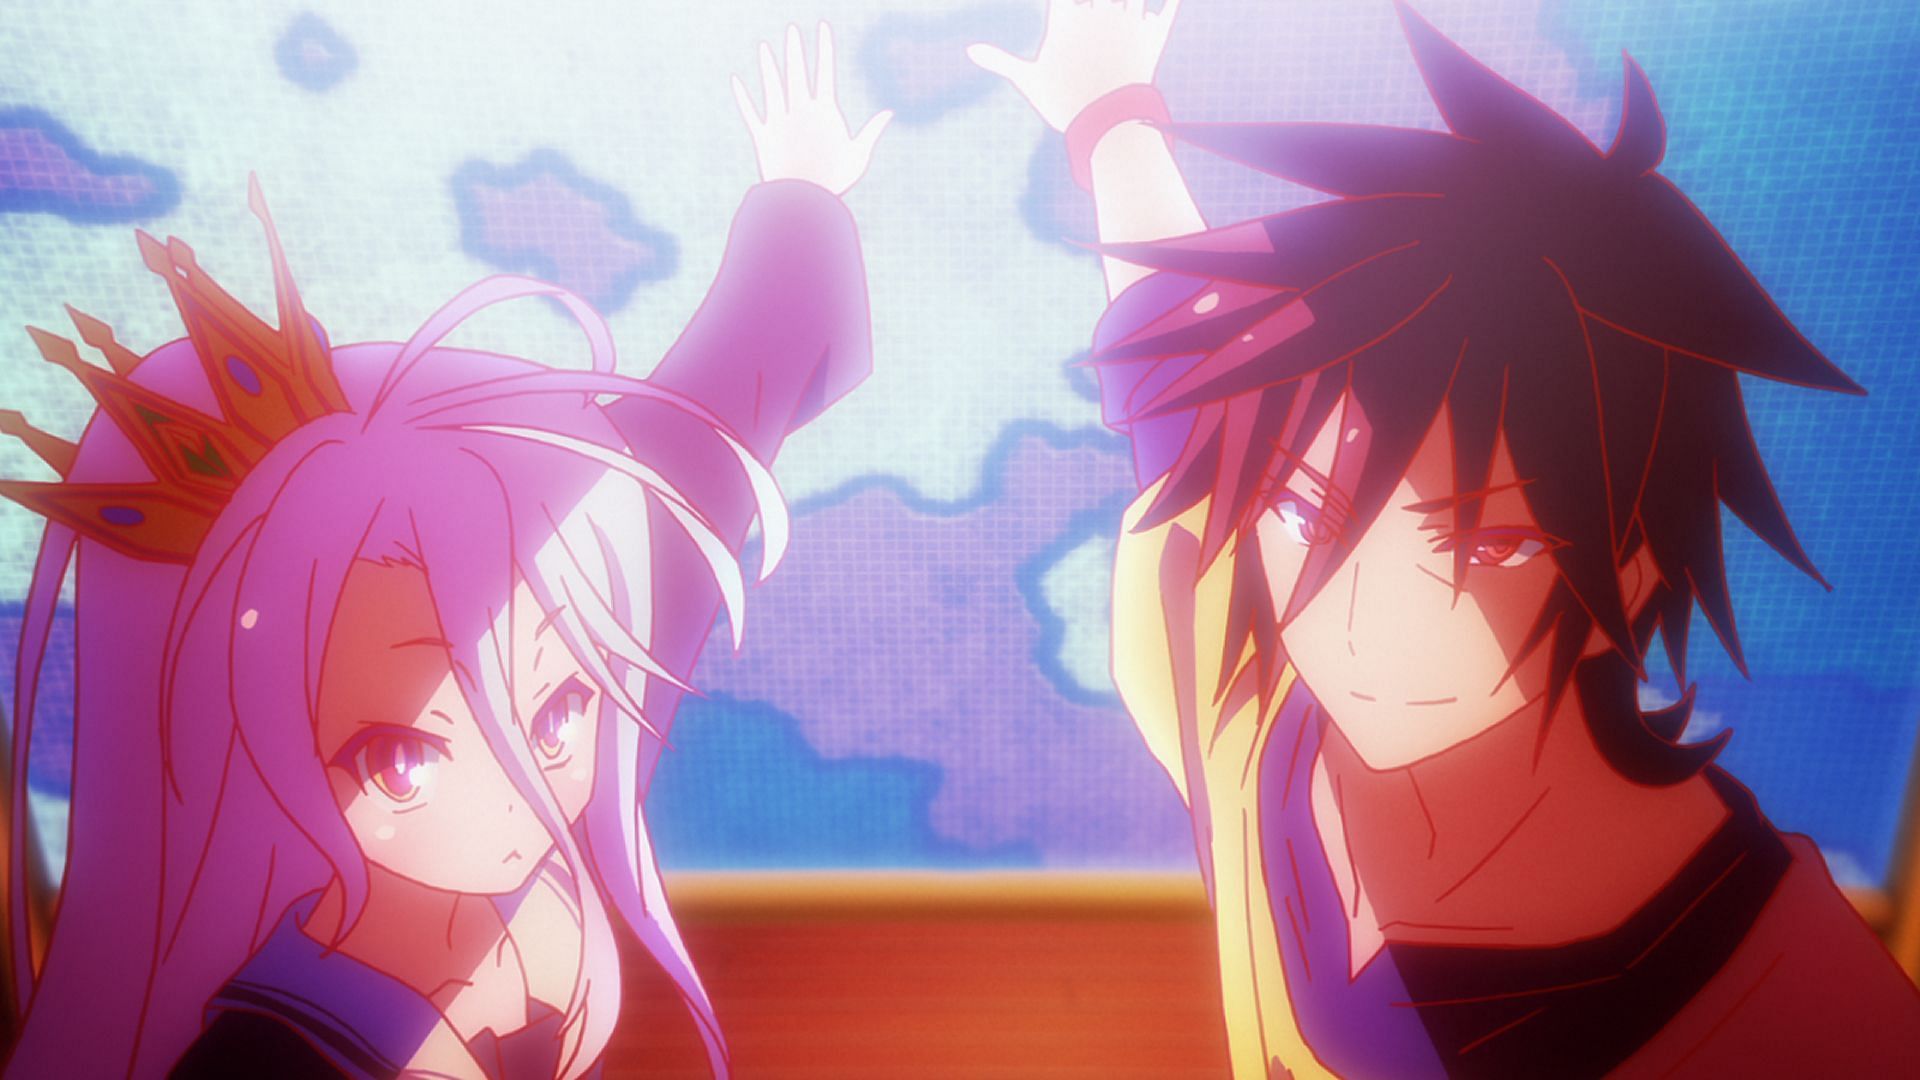 Sora and Shiro as seen in the show (Image via Studio Madhouse)